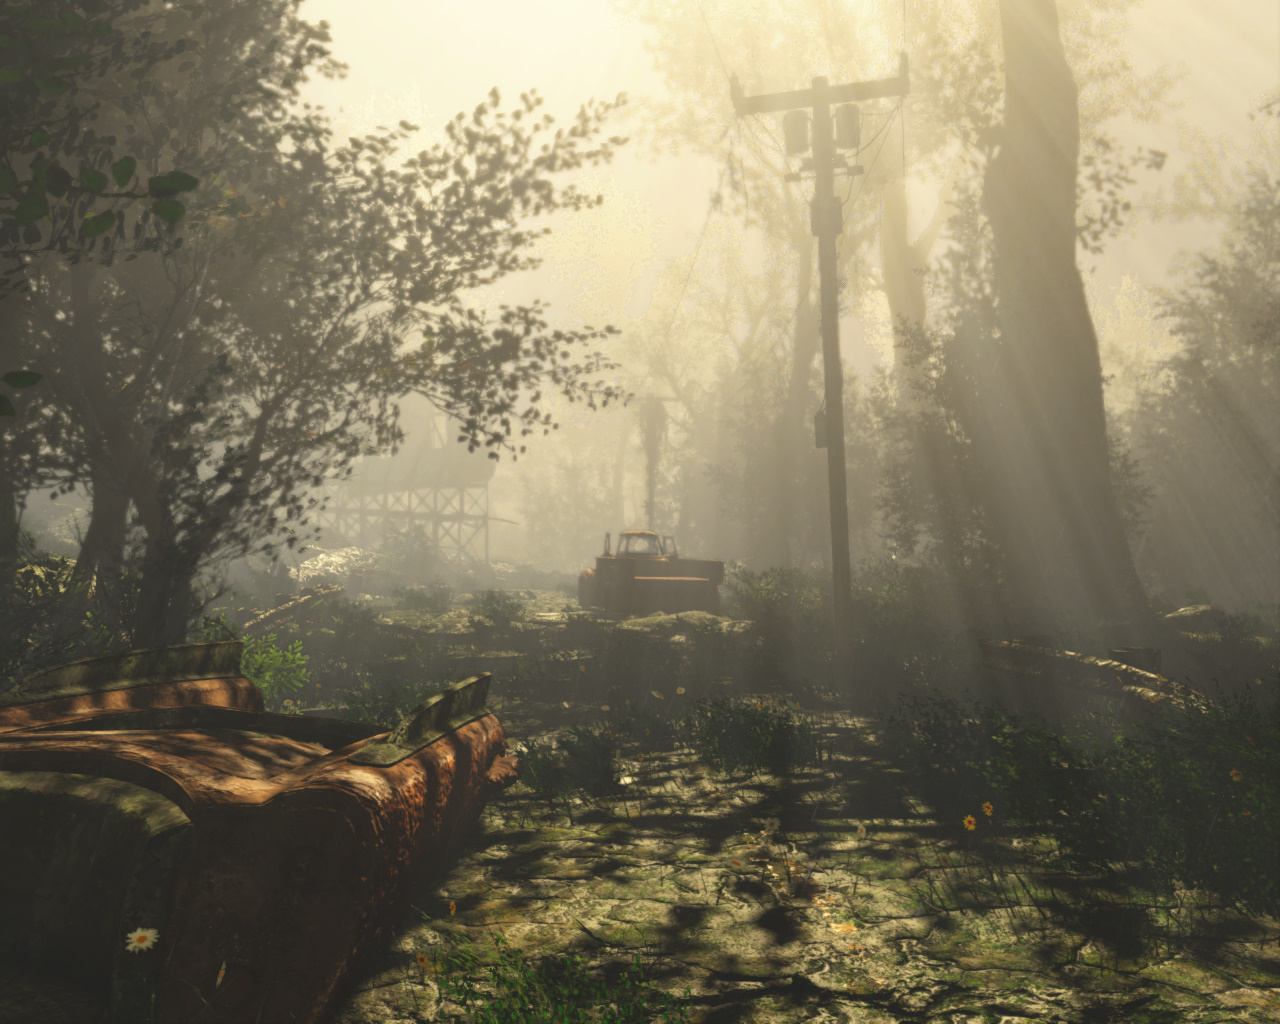 the forest creatire mod download